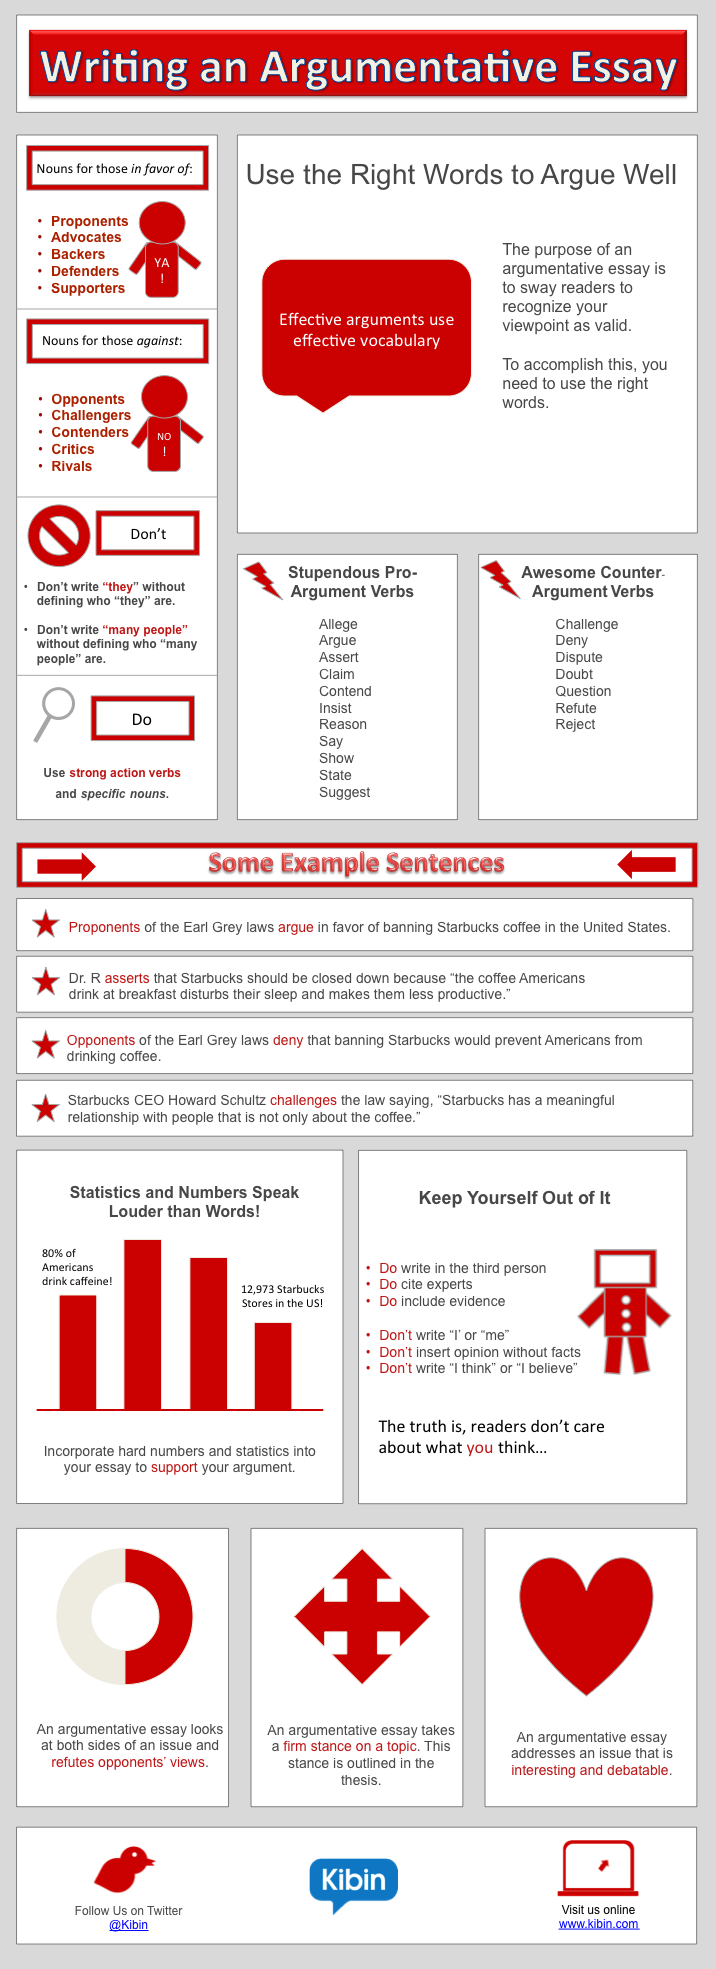 Writing an argumentative essay infographic